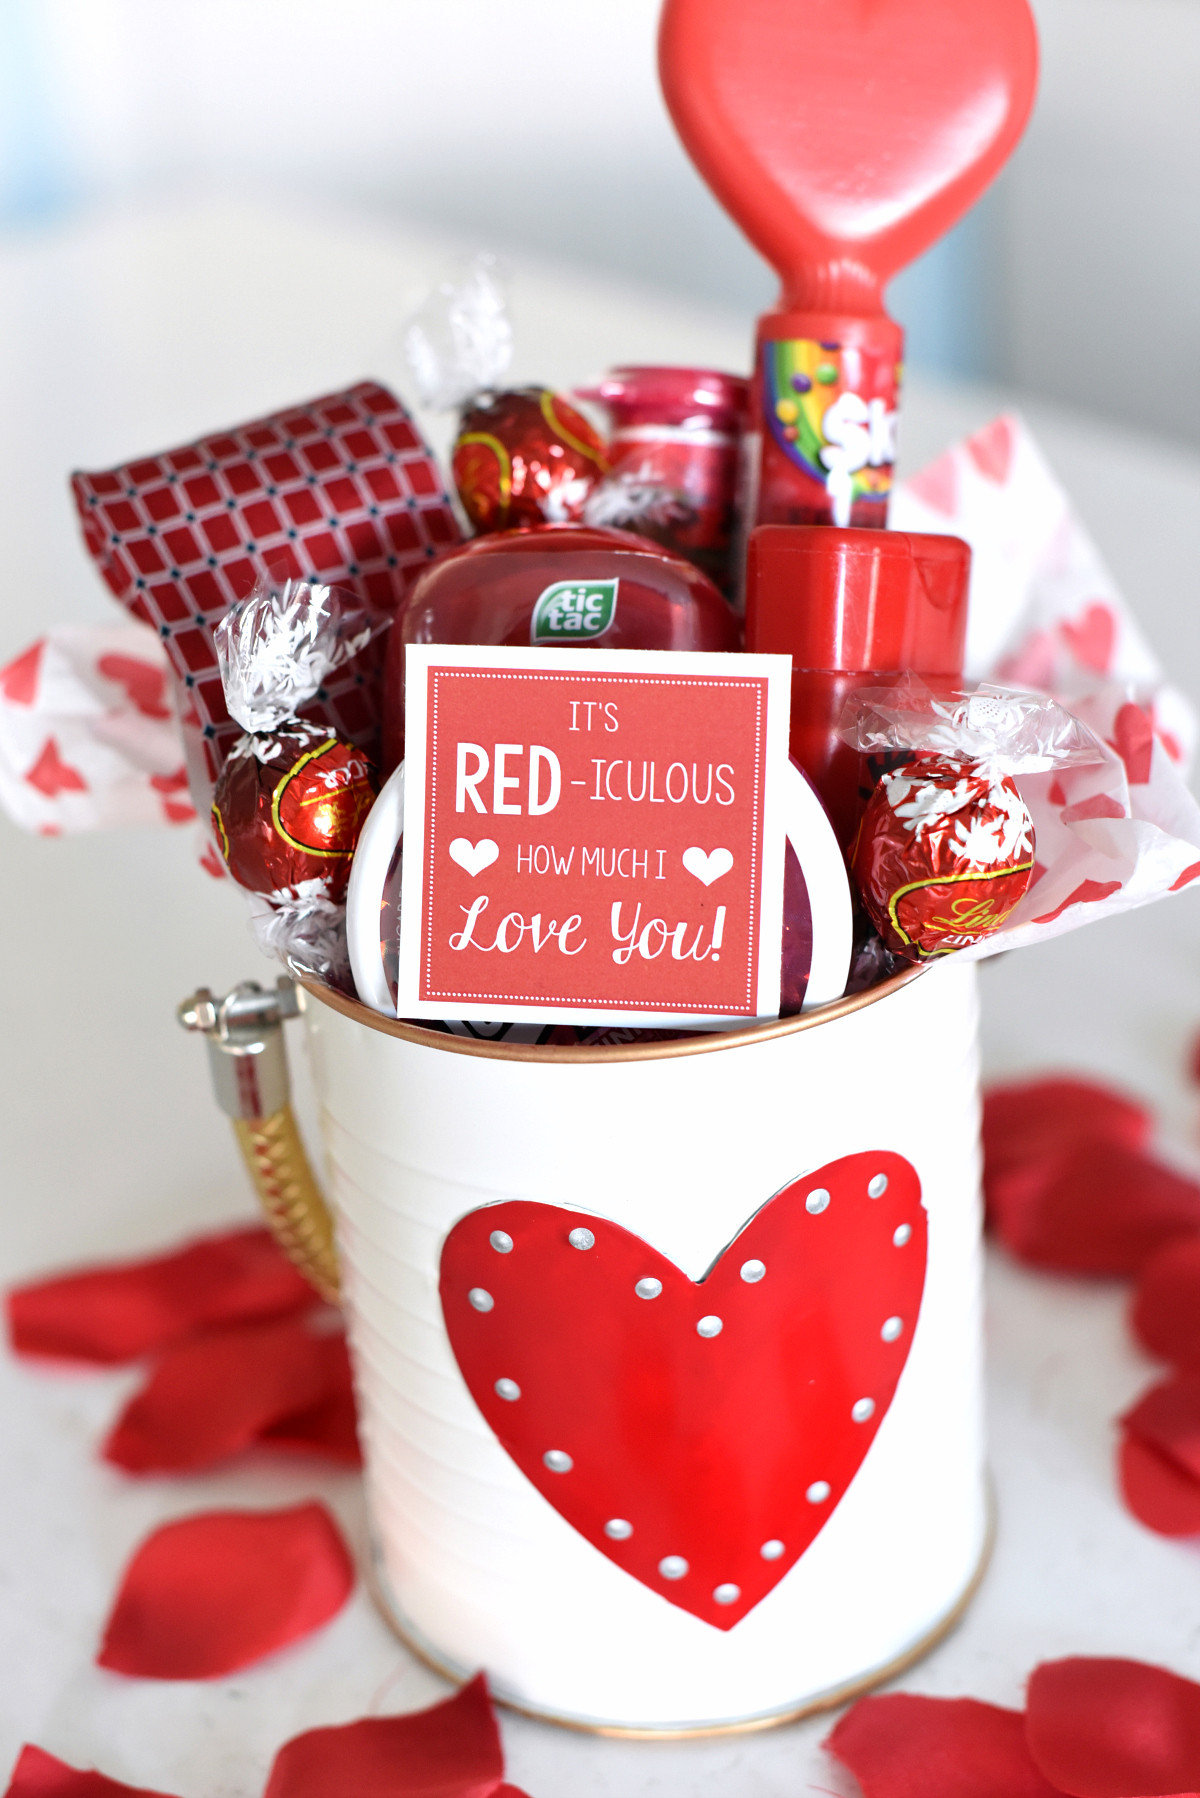 Romantic Valentines Day Gifts
 Cute Valentine s Day Gift Idea RED iculous Basket